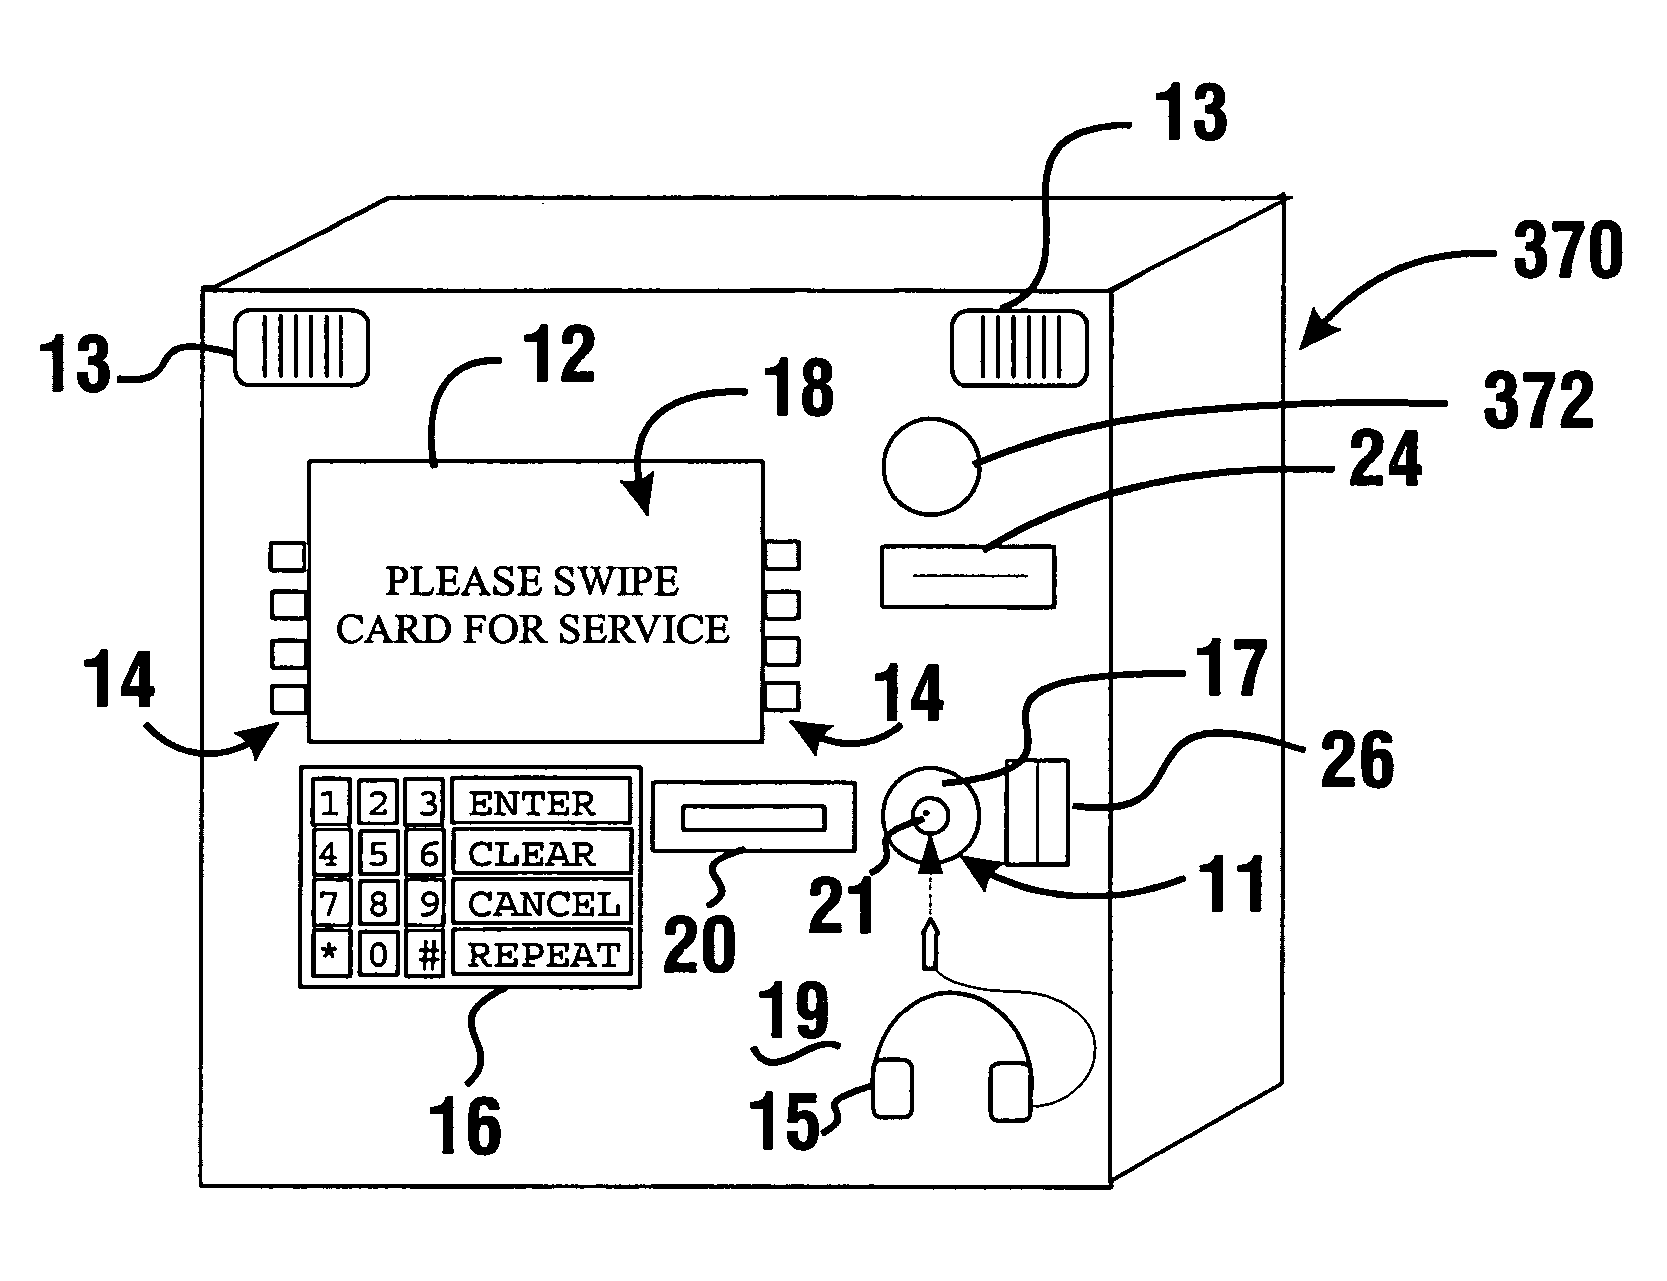 Cash dispensing automated banking machine user interface system and method